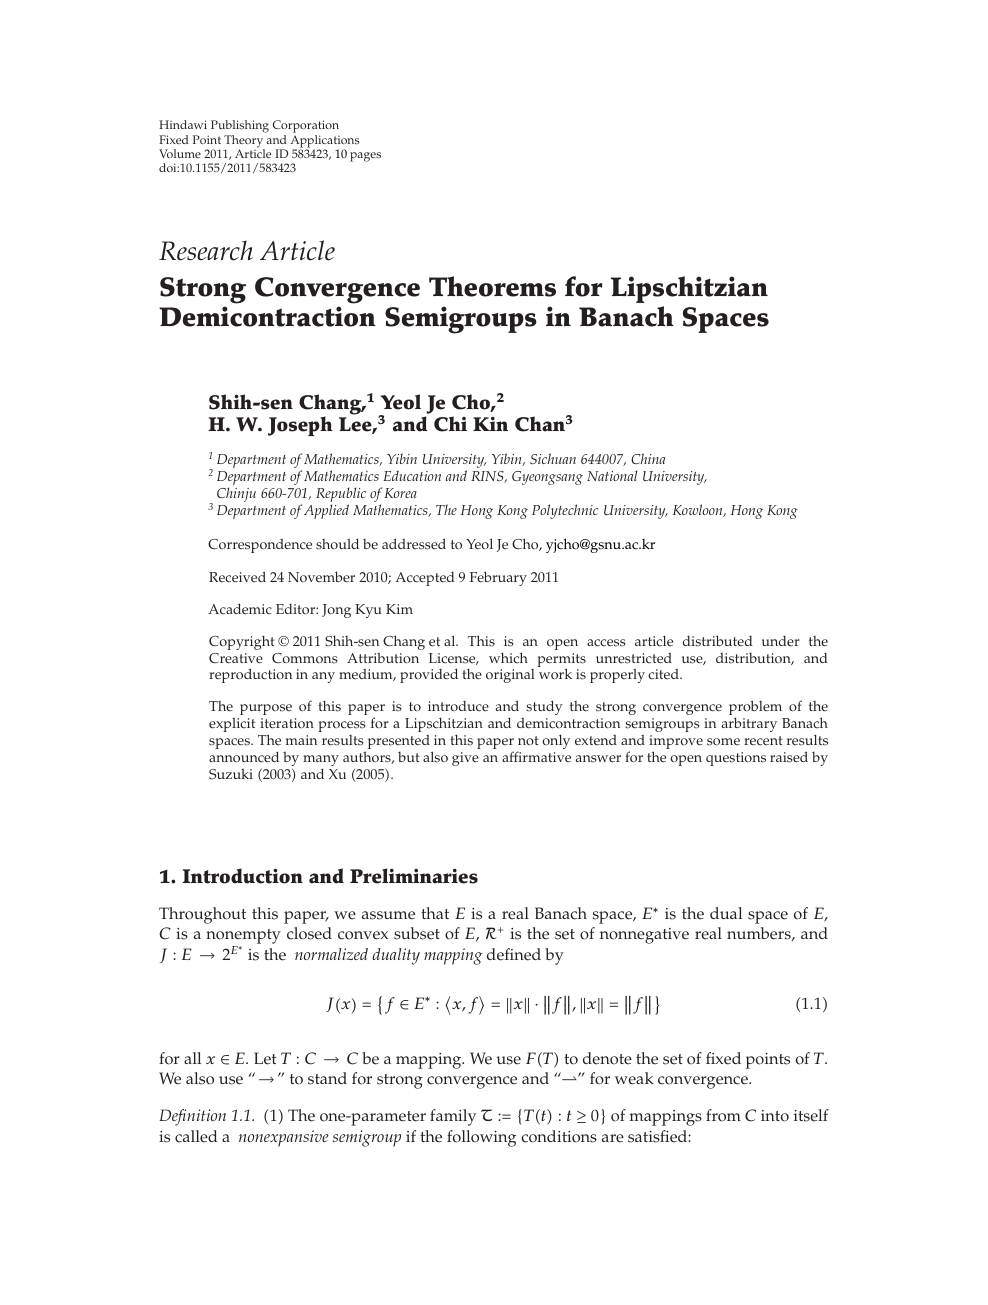 Strong Convergence Theorems For Lipschitzian Demicontraction Semigroups In Banach Spaces Topic Of Research Paper In Mathematics Download Scholarly Article Pdf And Read For Free On Cyberleninka Open Science Hub